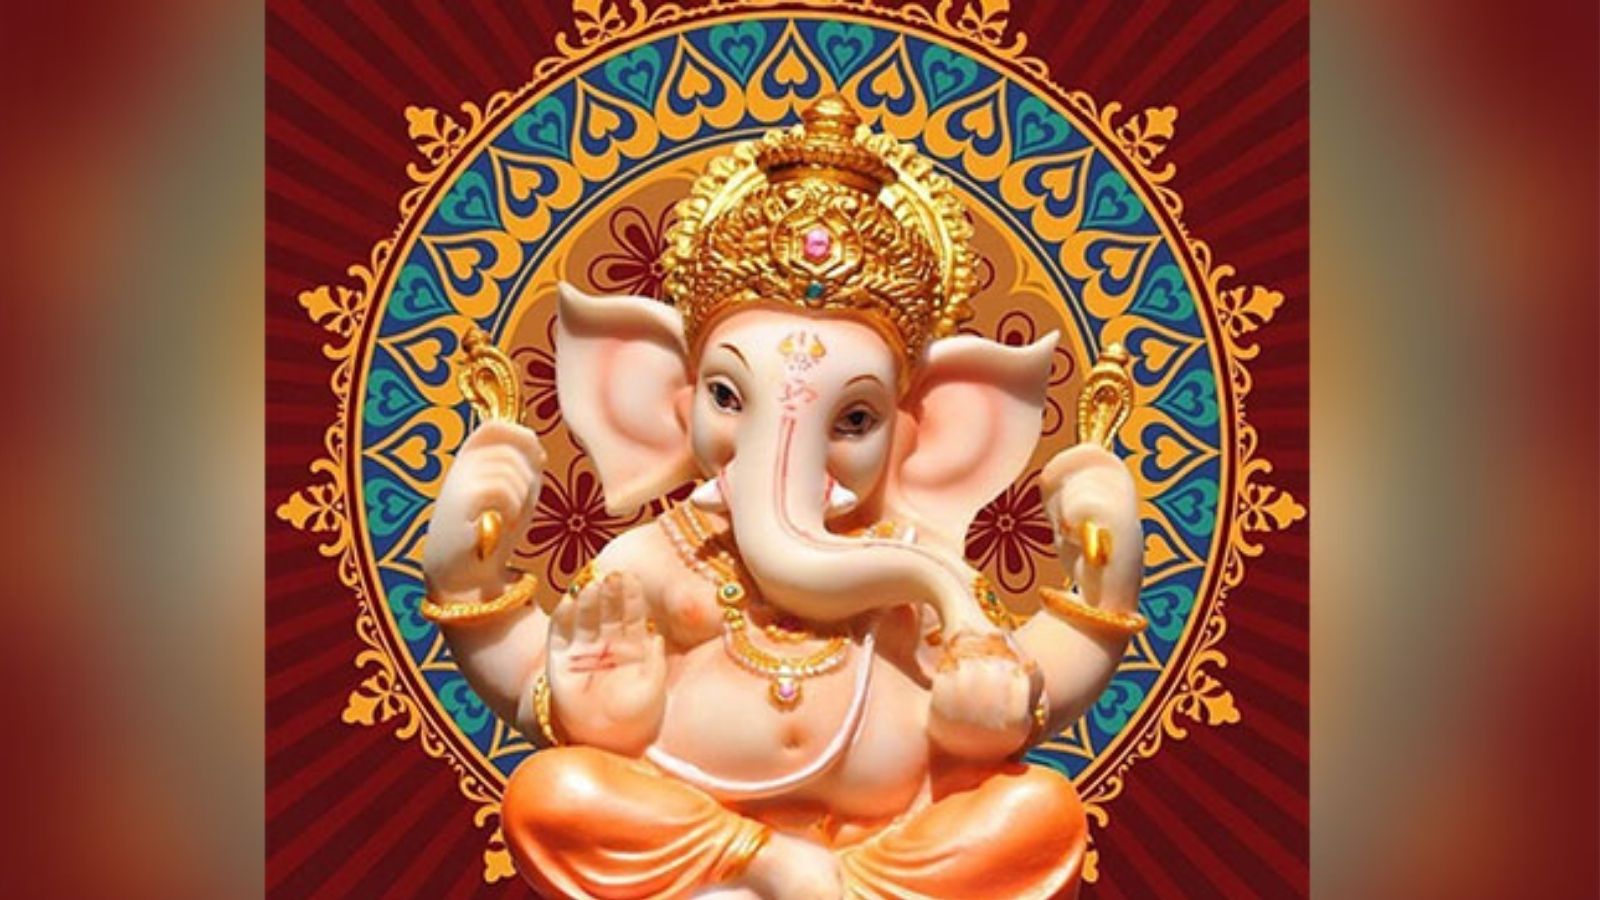 Happiness and prosperity will come to your house on the auspicious occasion of Ganesh Chaturthi